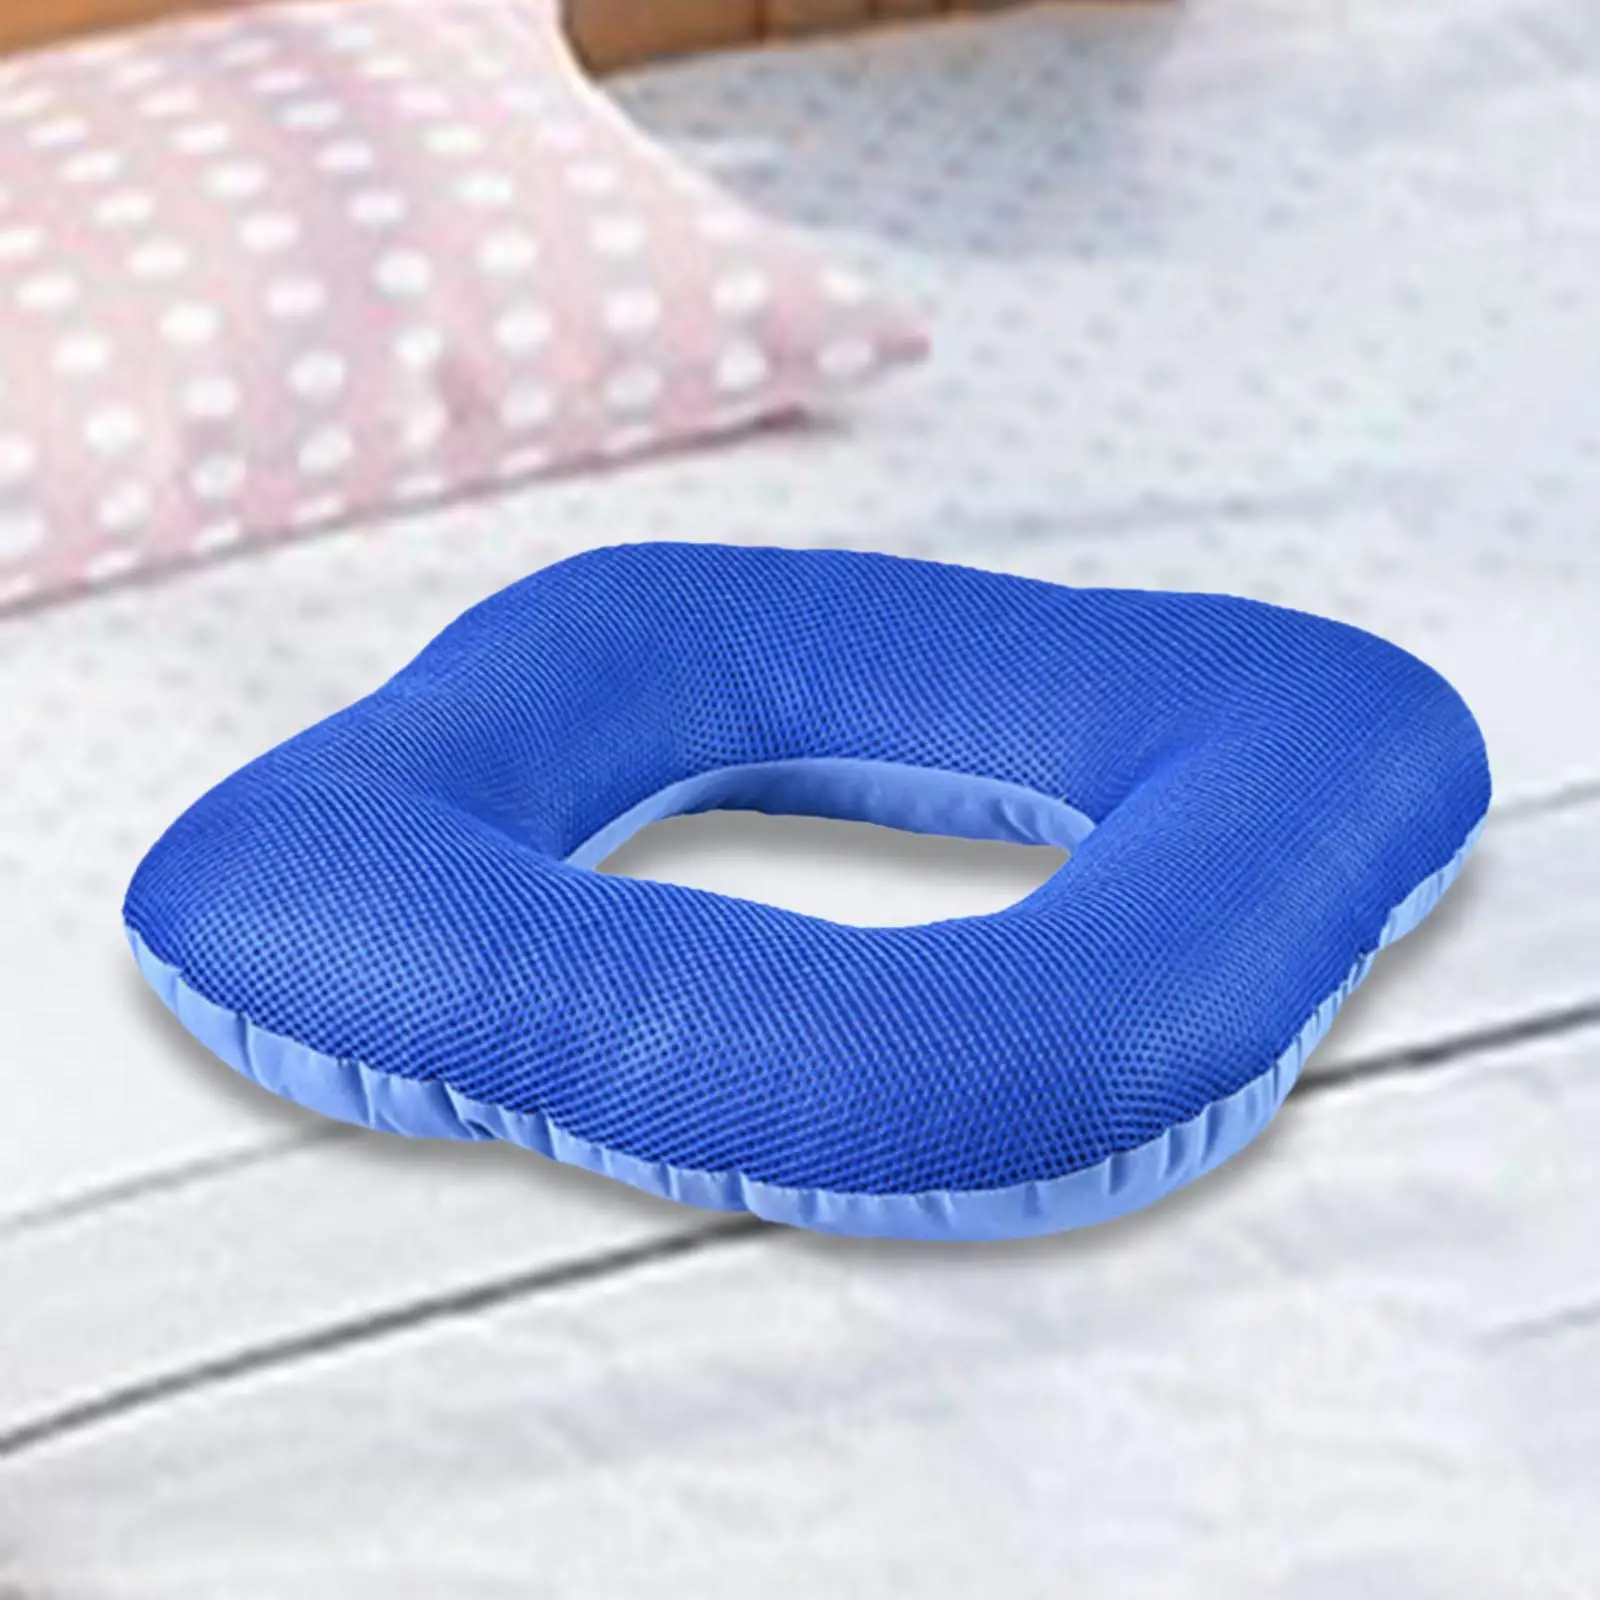 Sitting Pad Durable Support Comfortable Pressure Relief Seat Cushion Chair Cushion for Office Long Time Sitting Chair Car Home